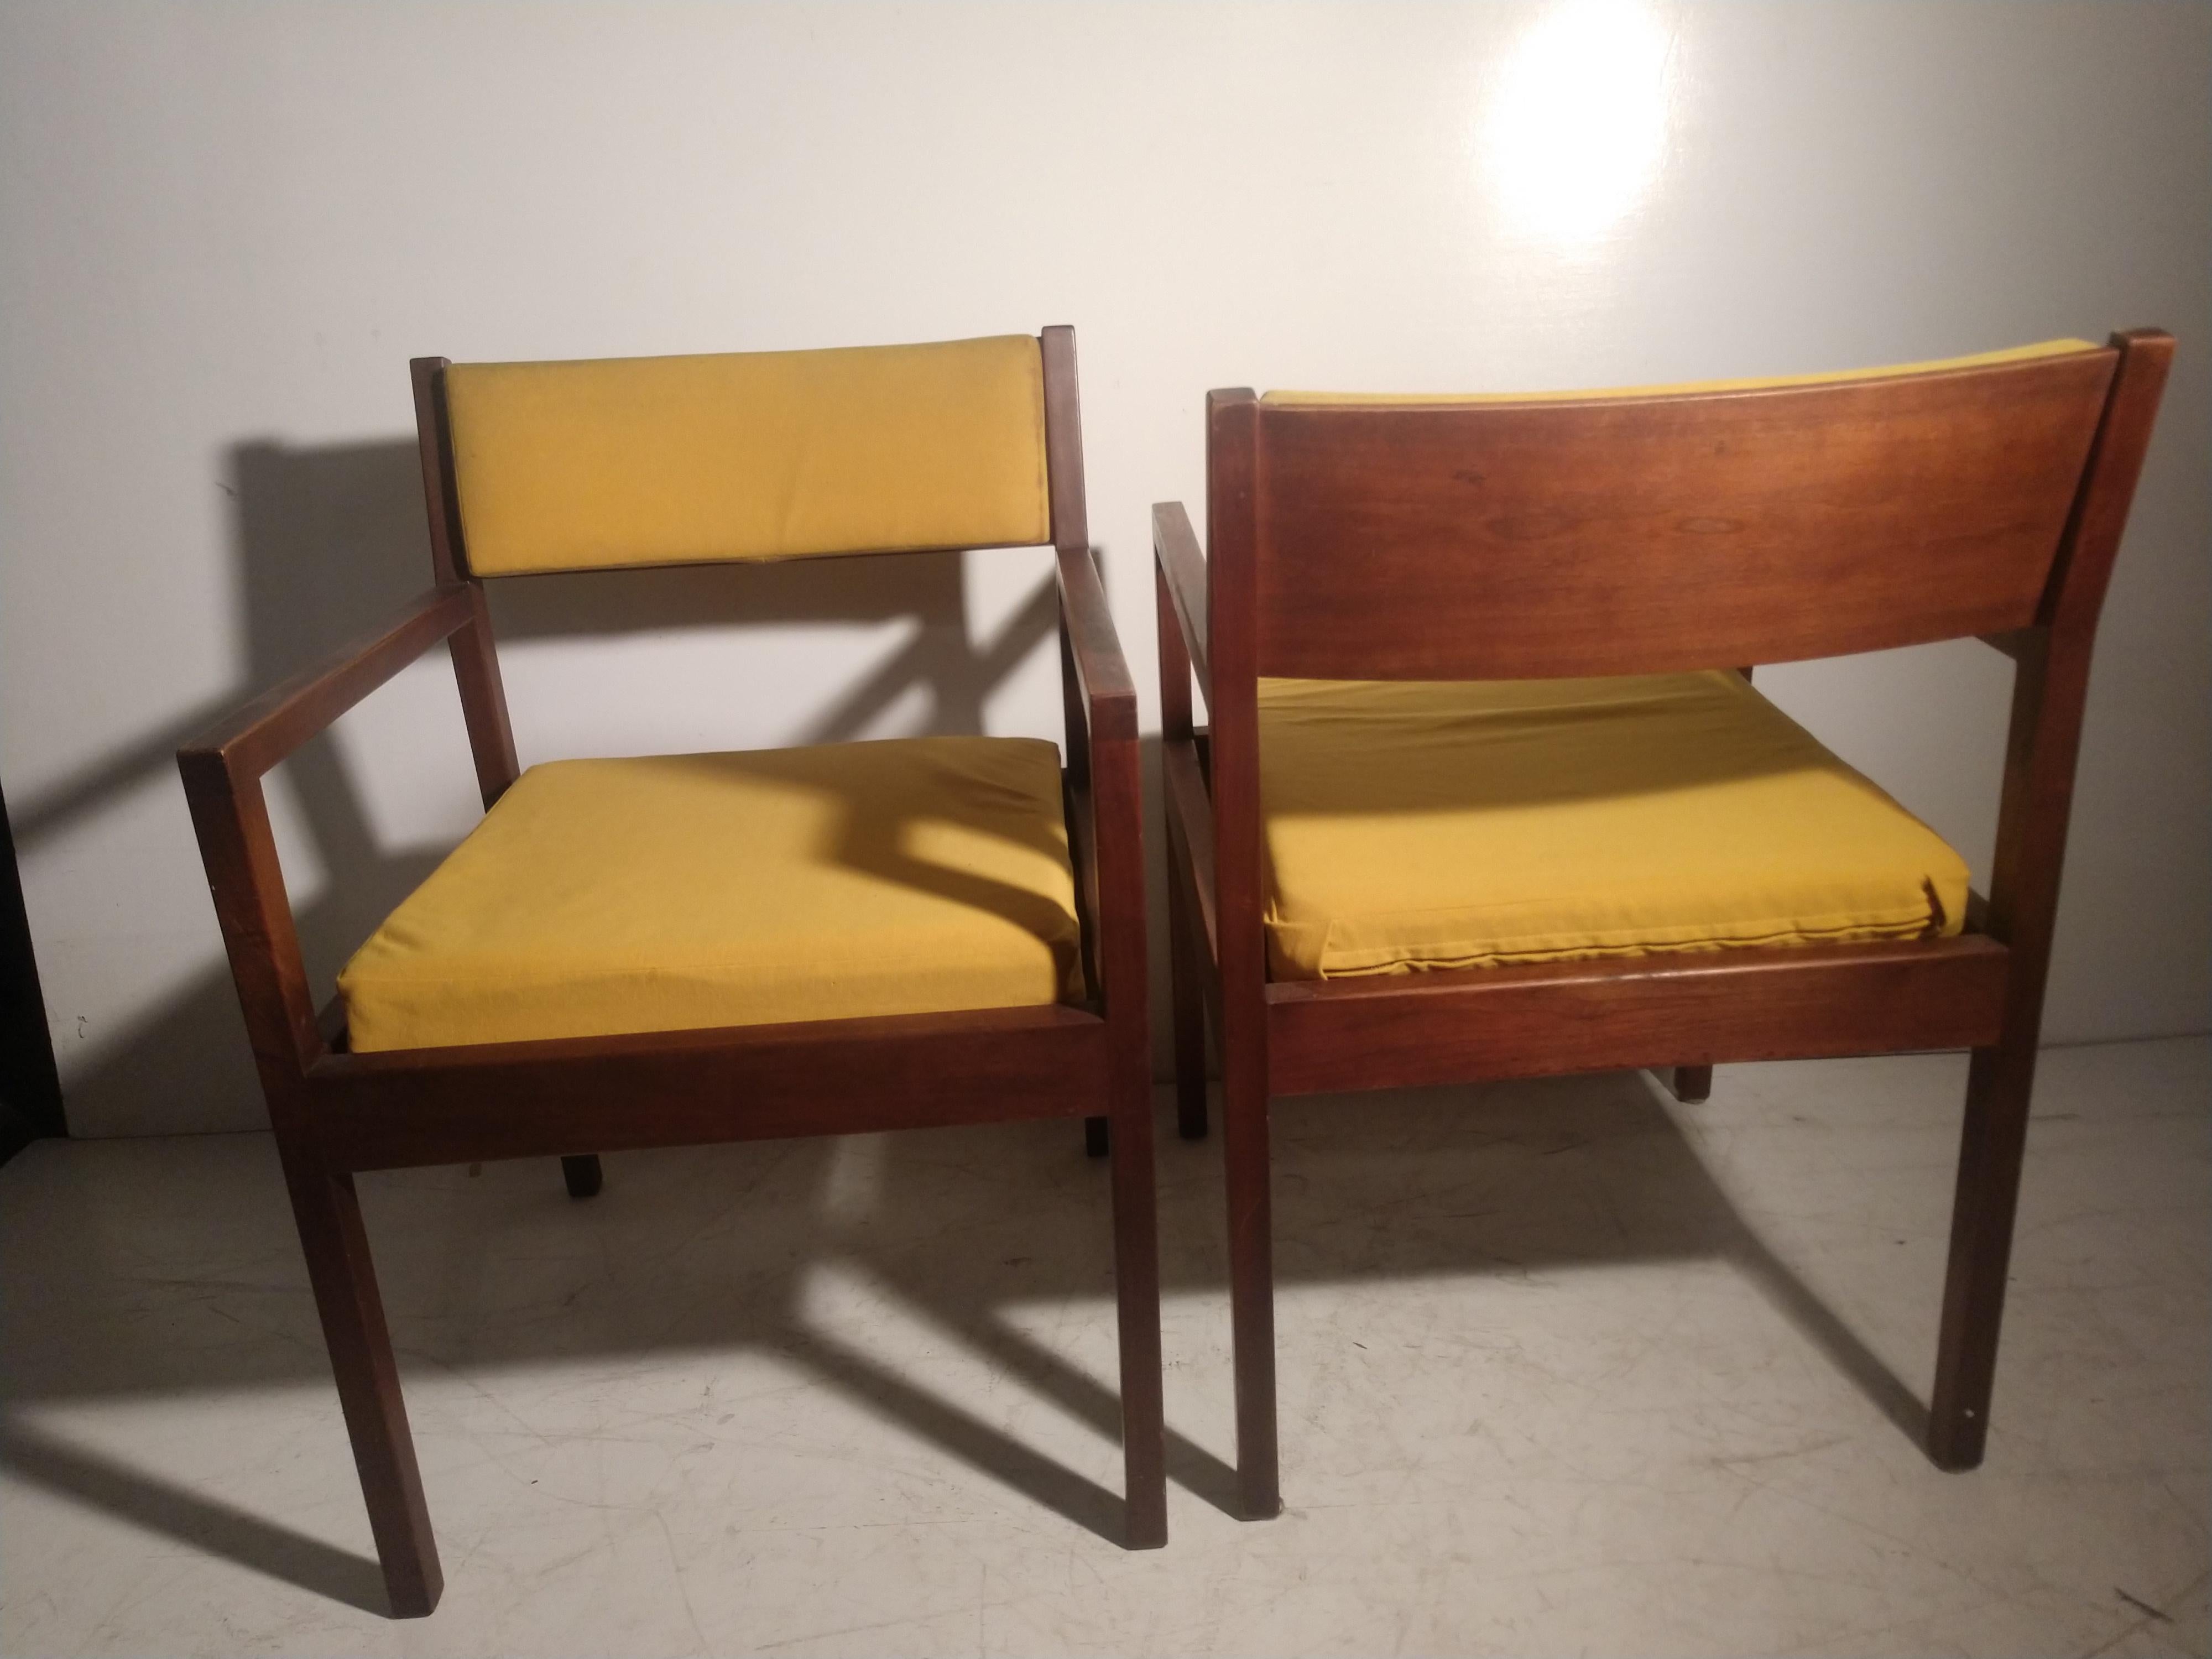 Pair of Mid-Century Modern Walnut Armchairs by George Nelson for Herman Miller 2